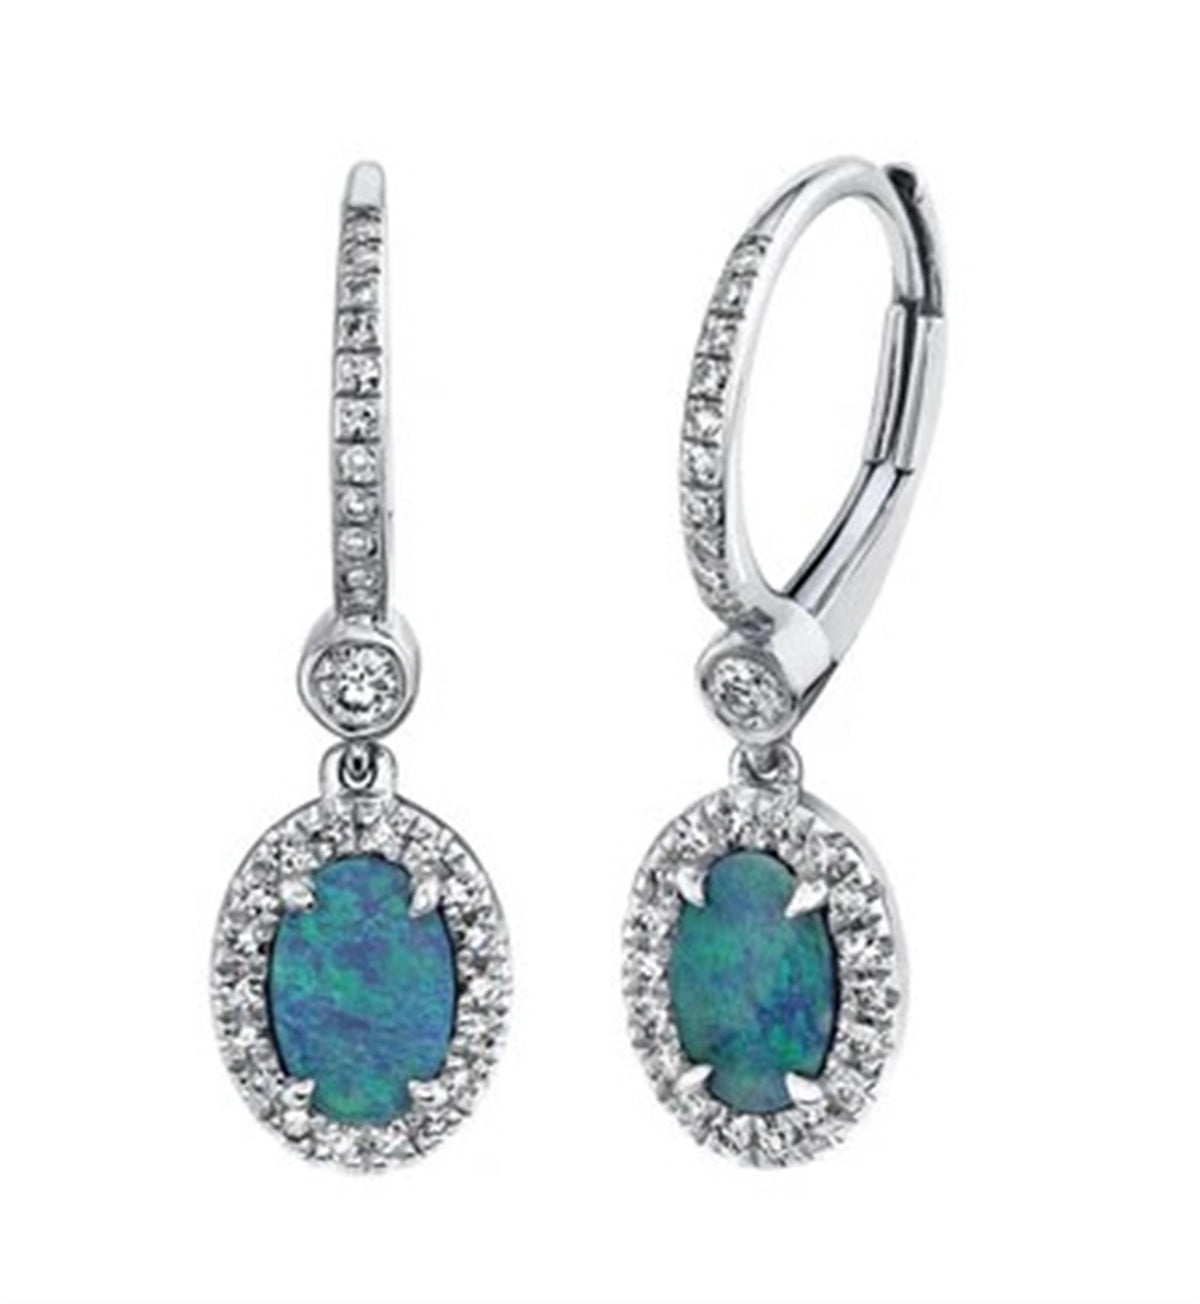 14Kt White Gold Leverback Dangle Earrings With .67cttw Boulder Opals